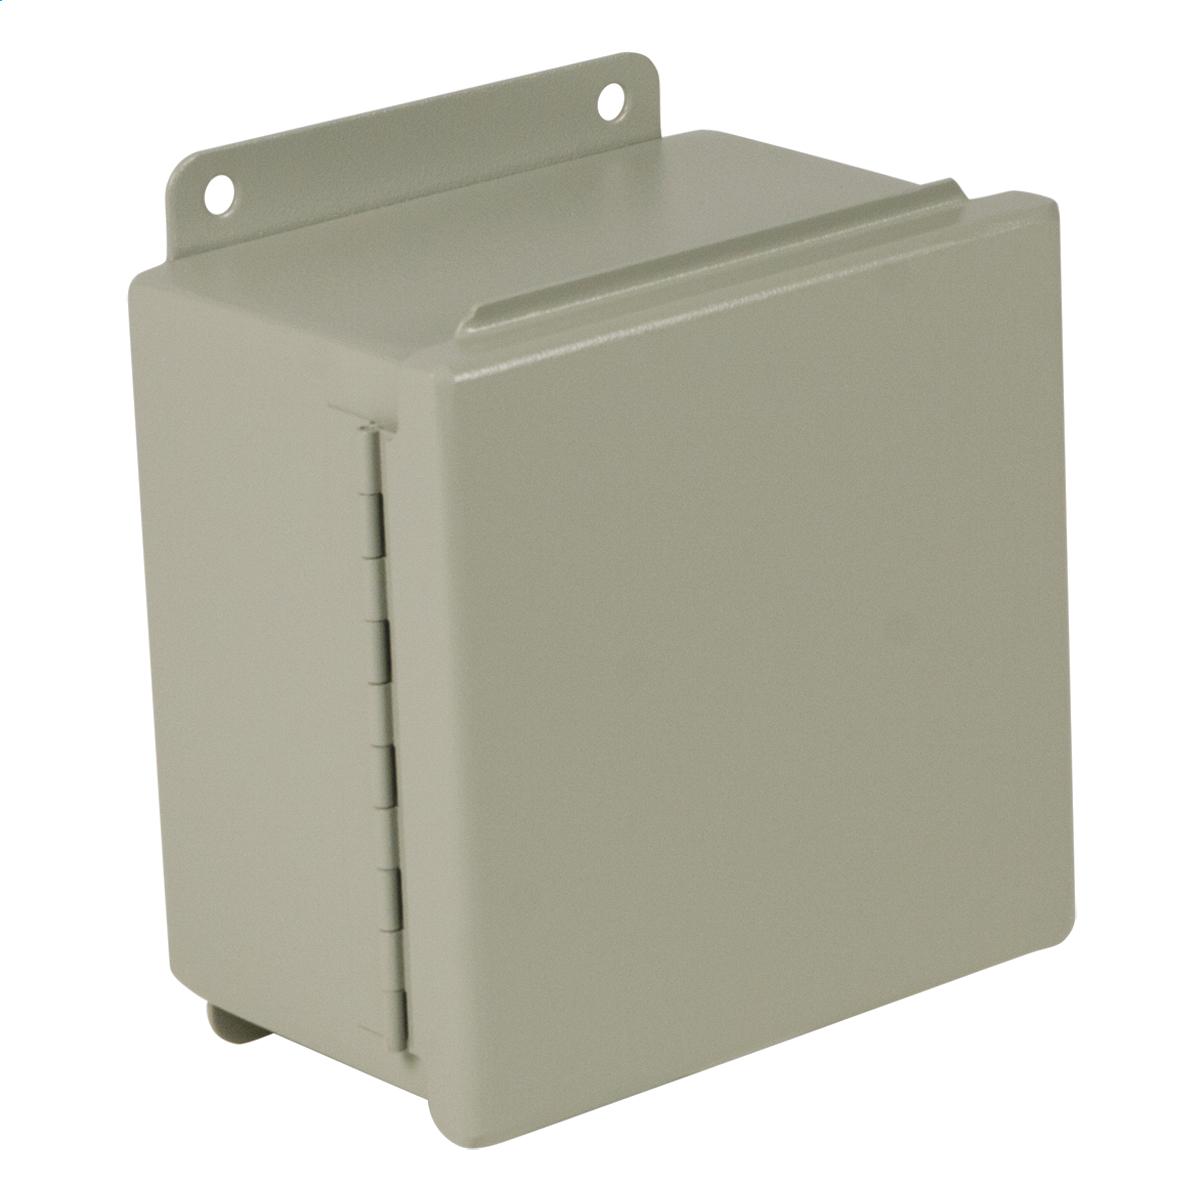 Hubbell B121008CH N12 JIC Continuous Hinge 12X10X8 Carbon Steel - Gray  ; Bodies fabricated from 14 gauge and doors fabricated from 16 gauge steel. Continuously welded seams ground smooth, less knockouts or holes. Lids are sealed with closed cell oil resistant neoprene gas